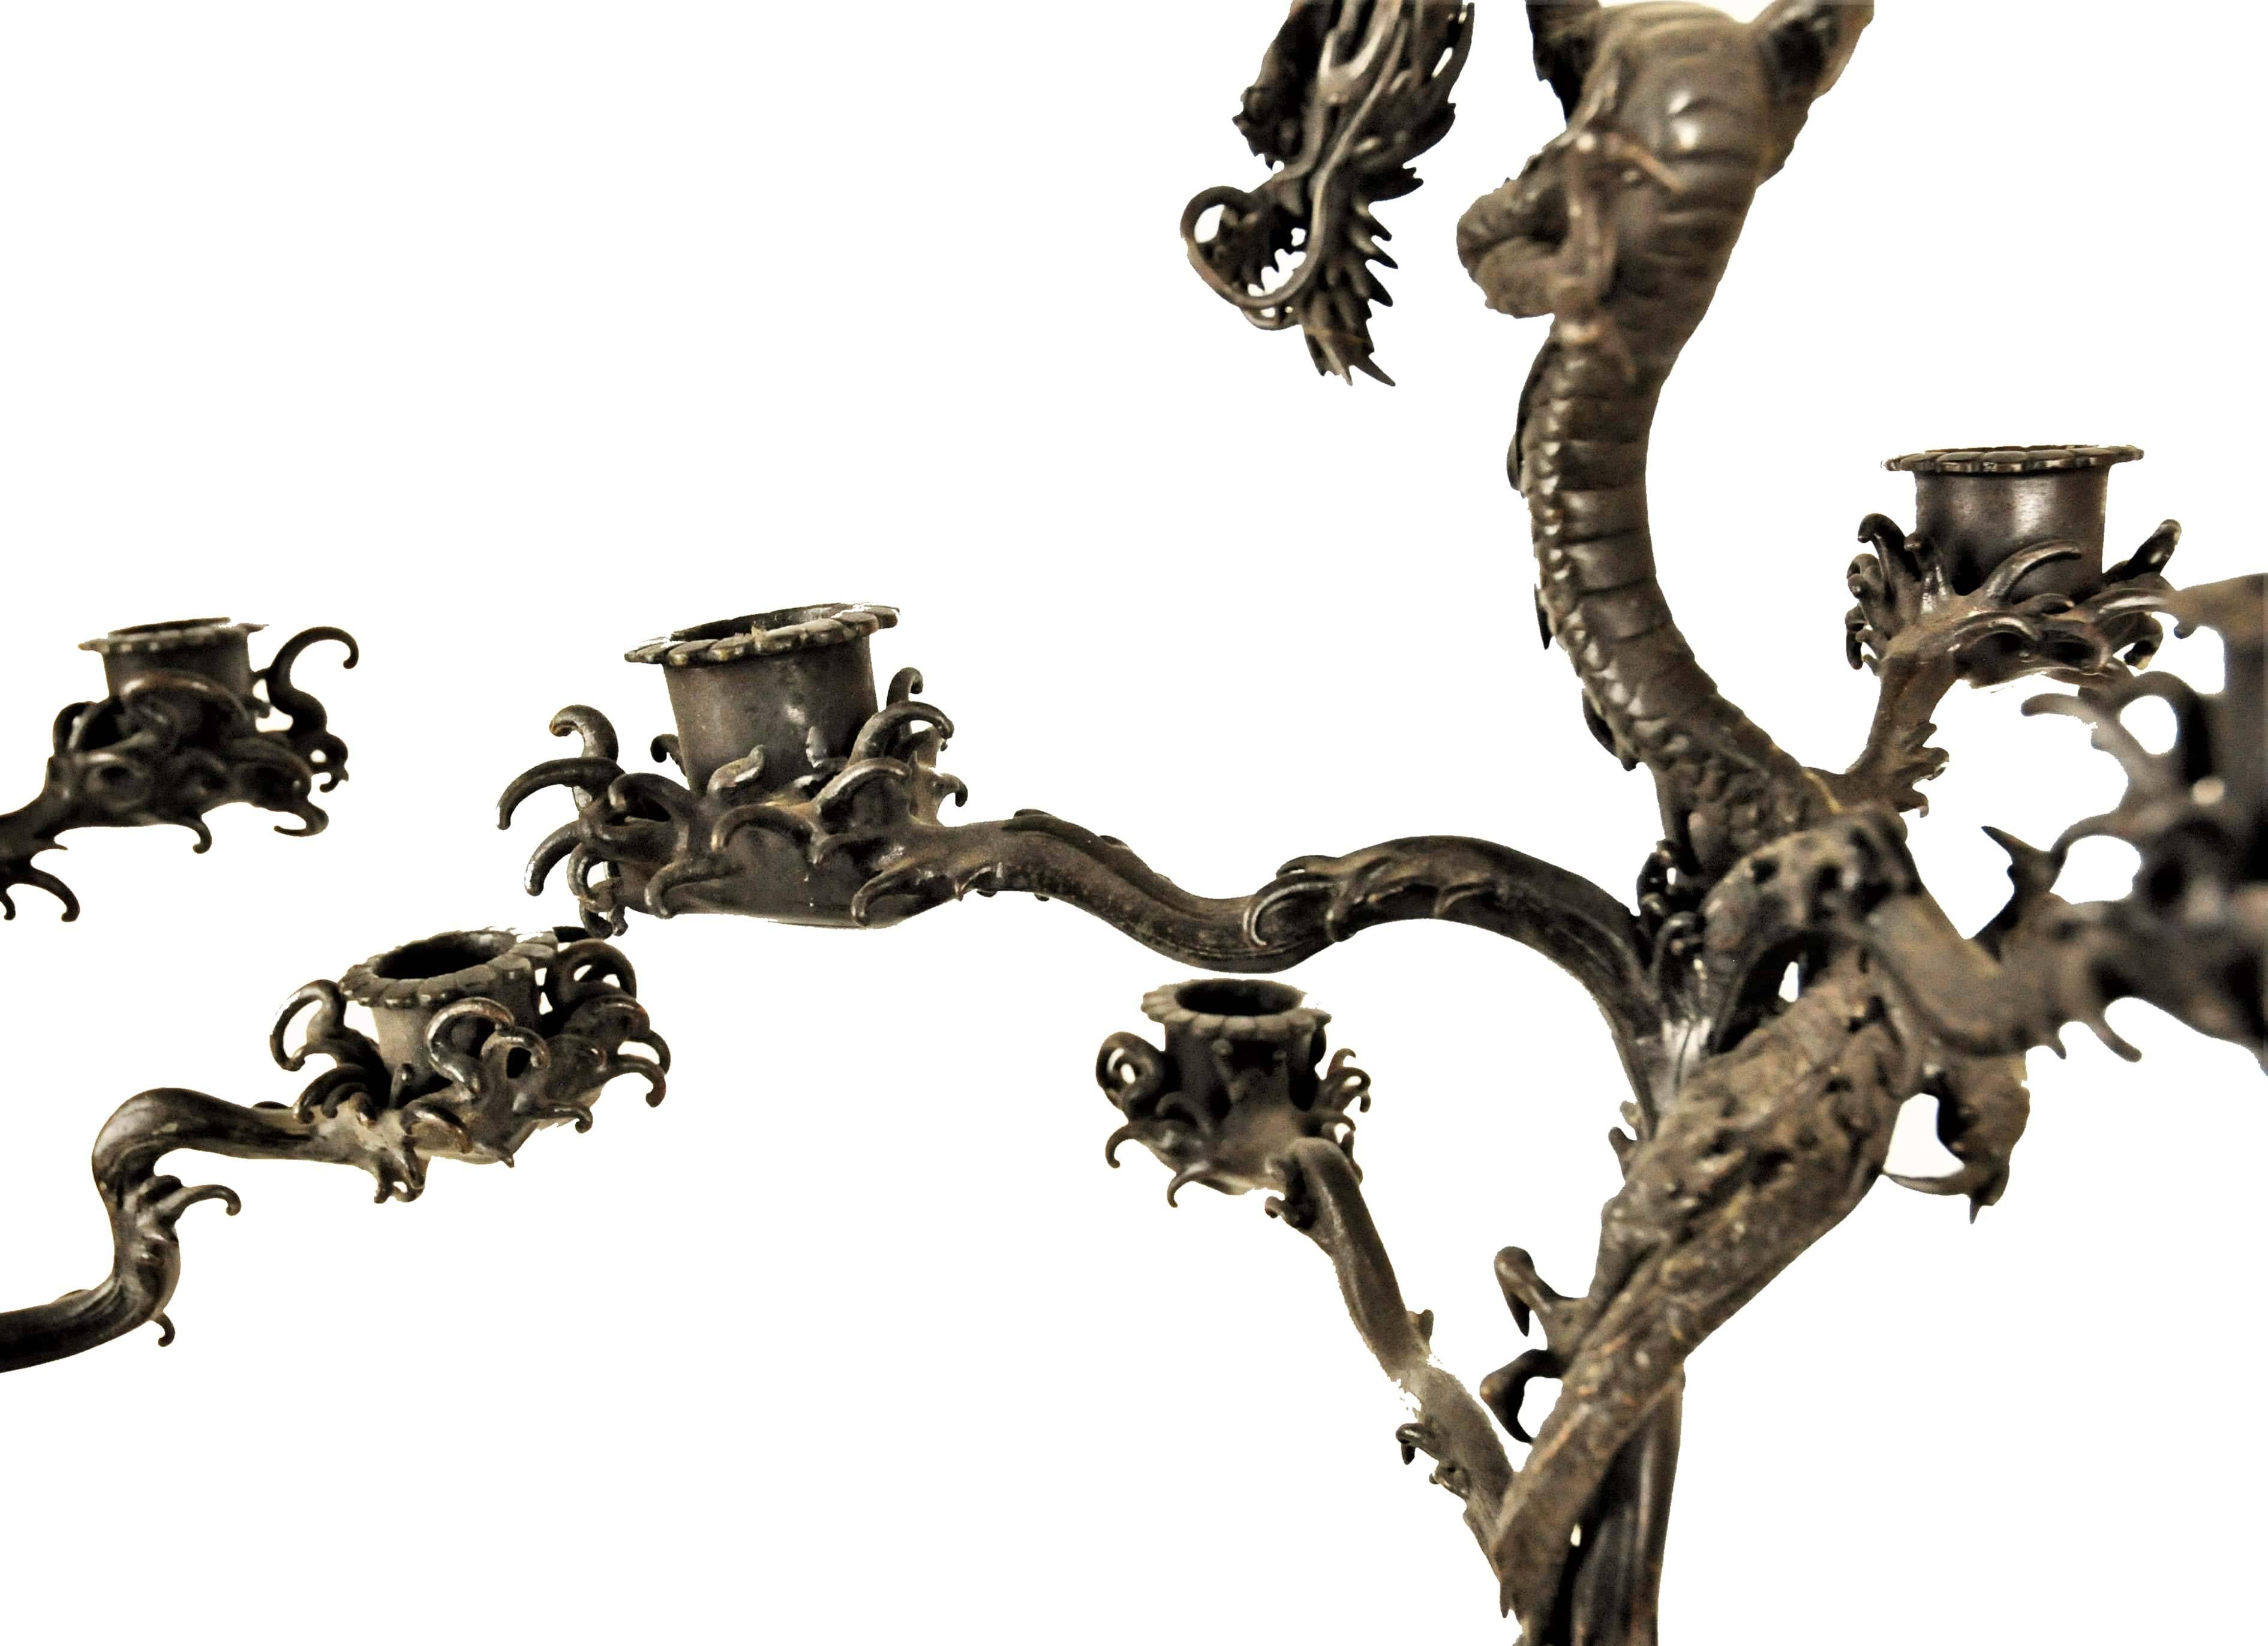 Pair of Japanese Patinated Bronze Candelabras, Meiji Period, ca. 1900 For Sale 2